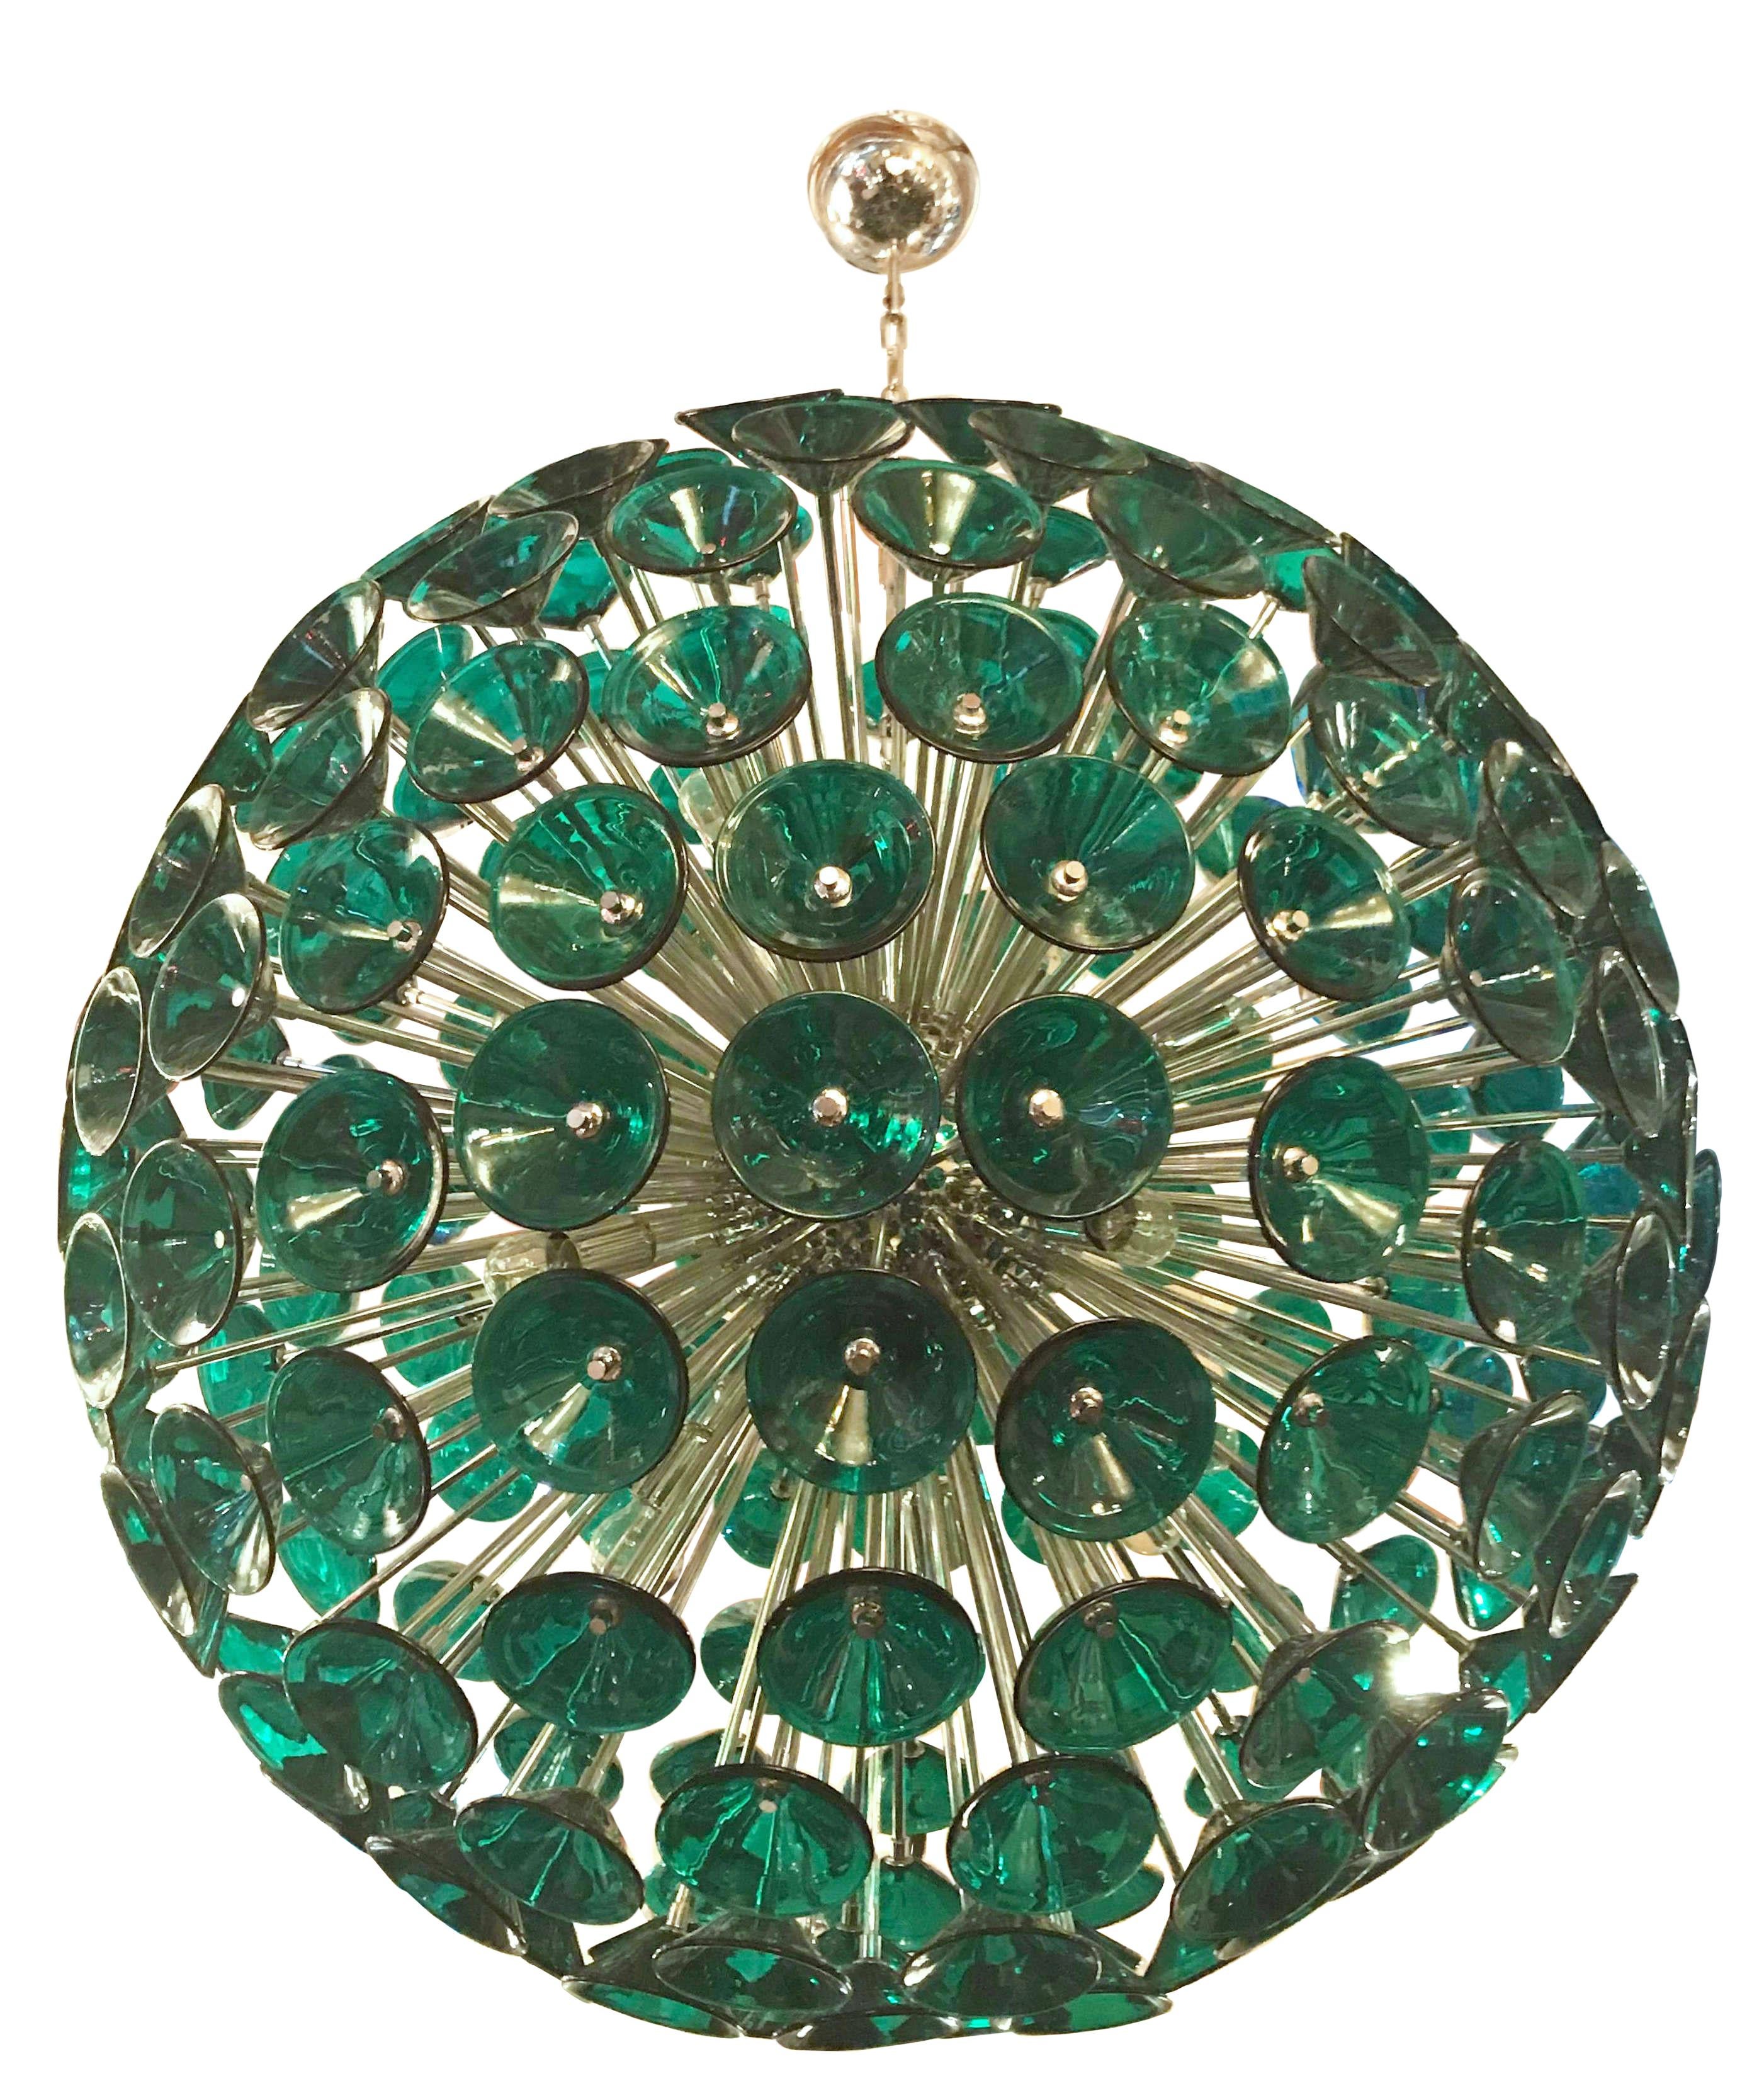 Vintage sputnik chandelier with 207 green Murano glass trumpets in the style of Vistosi on new metal frame by Fabio Ltd. available in chrome or 24k gold metal finish.
16 lights / E27 type / max 40W each
Diameter: 43 inches / Height: 43 inches
1 in